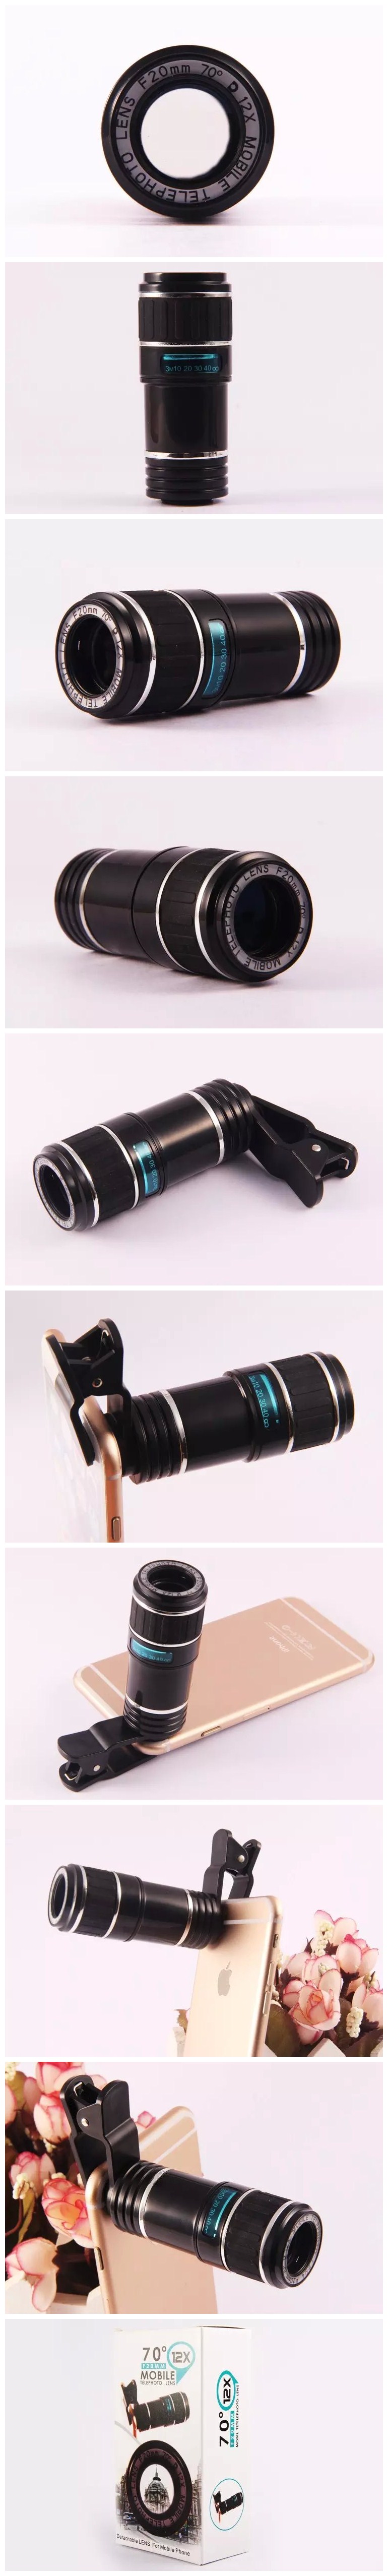 12X Universal Telephoto Lens Mobile Phone Optical Zoom Telescope Camera For iPhone Sumsung